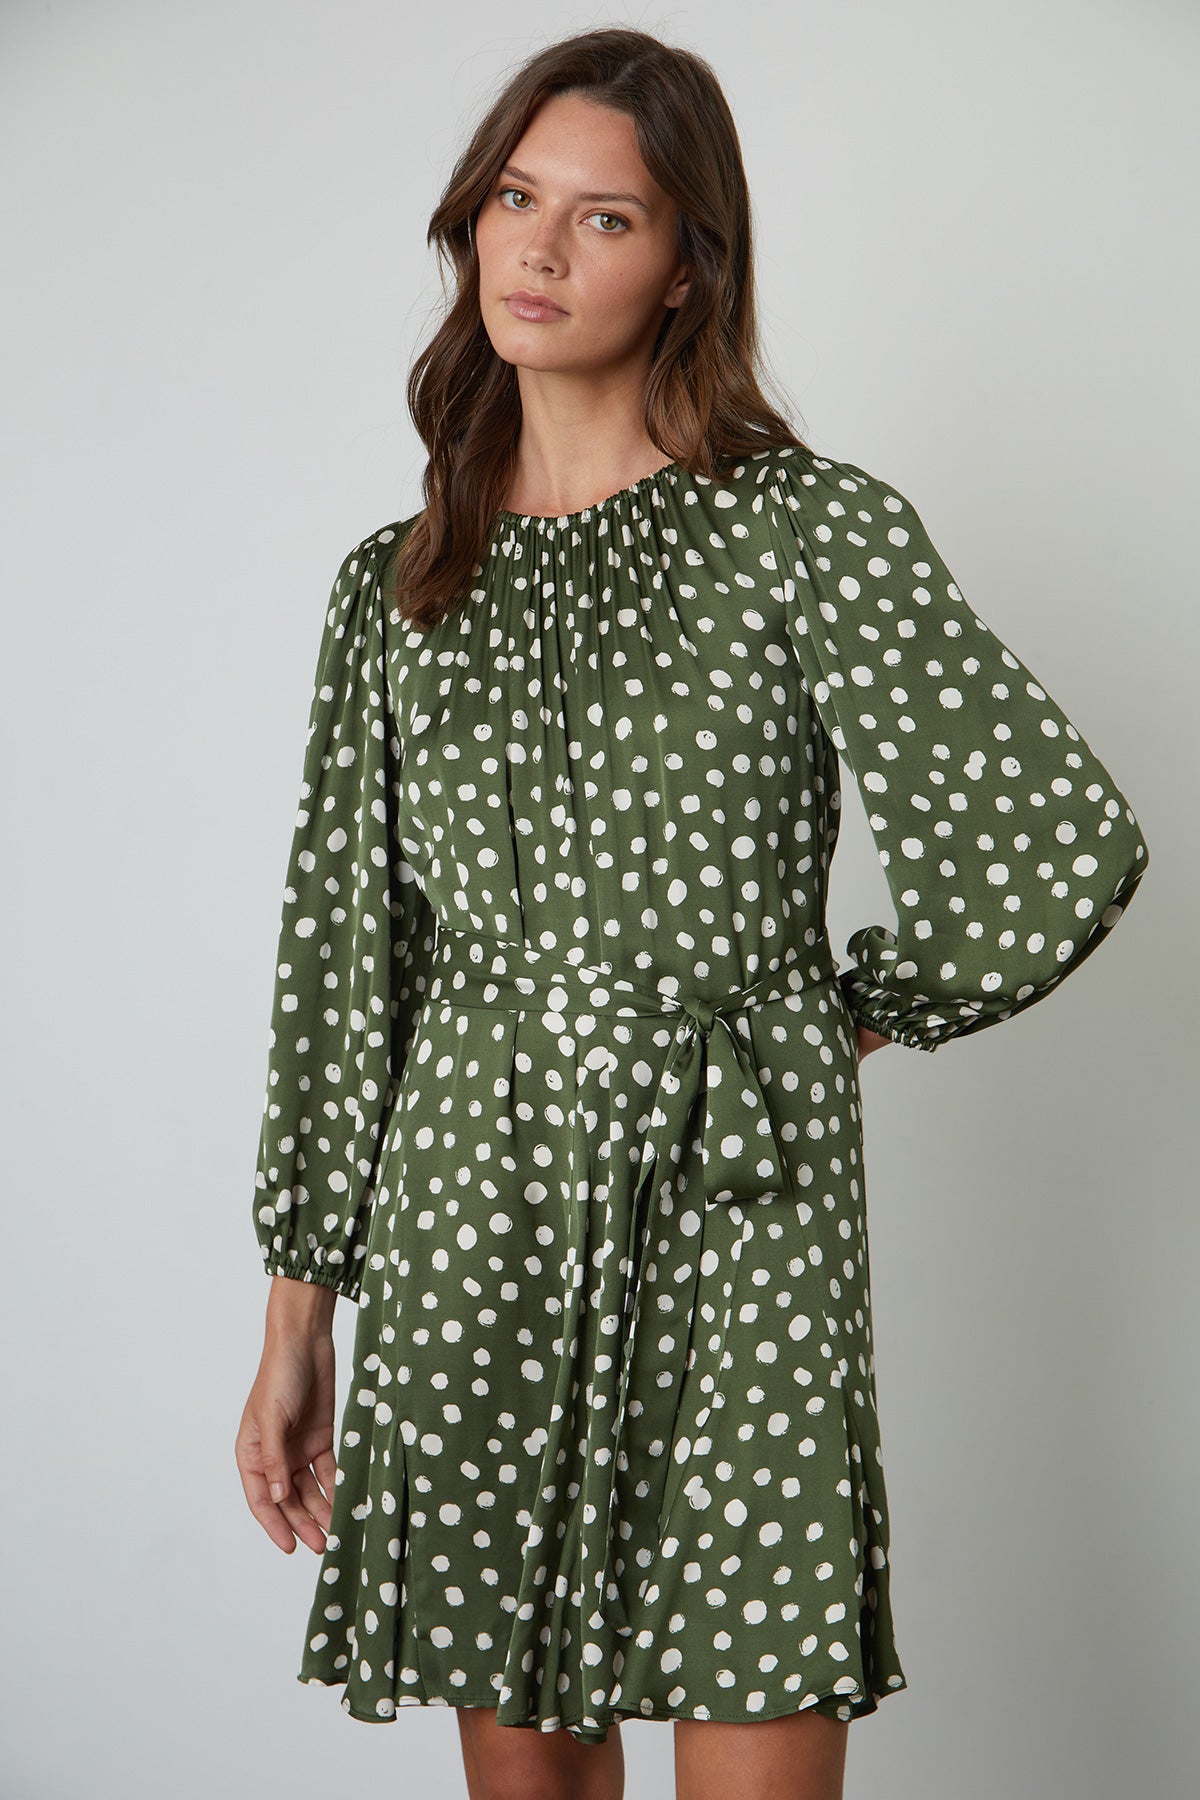   Kenia Polka Dot Dress with Green Background and Cream Dots Tied at Waist front 